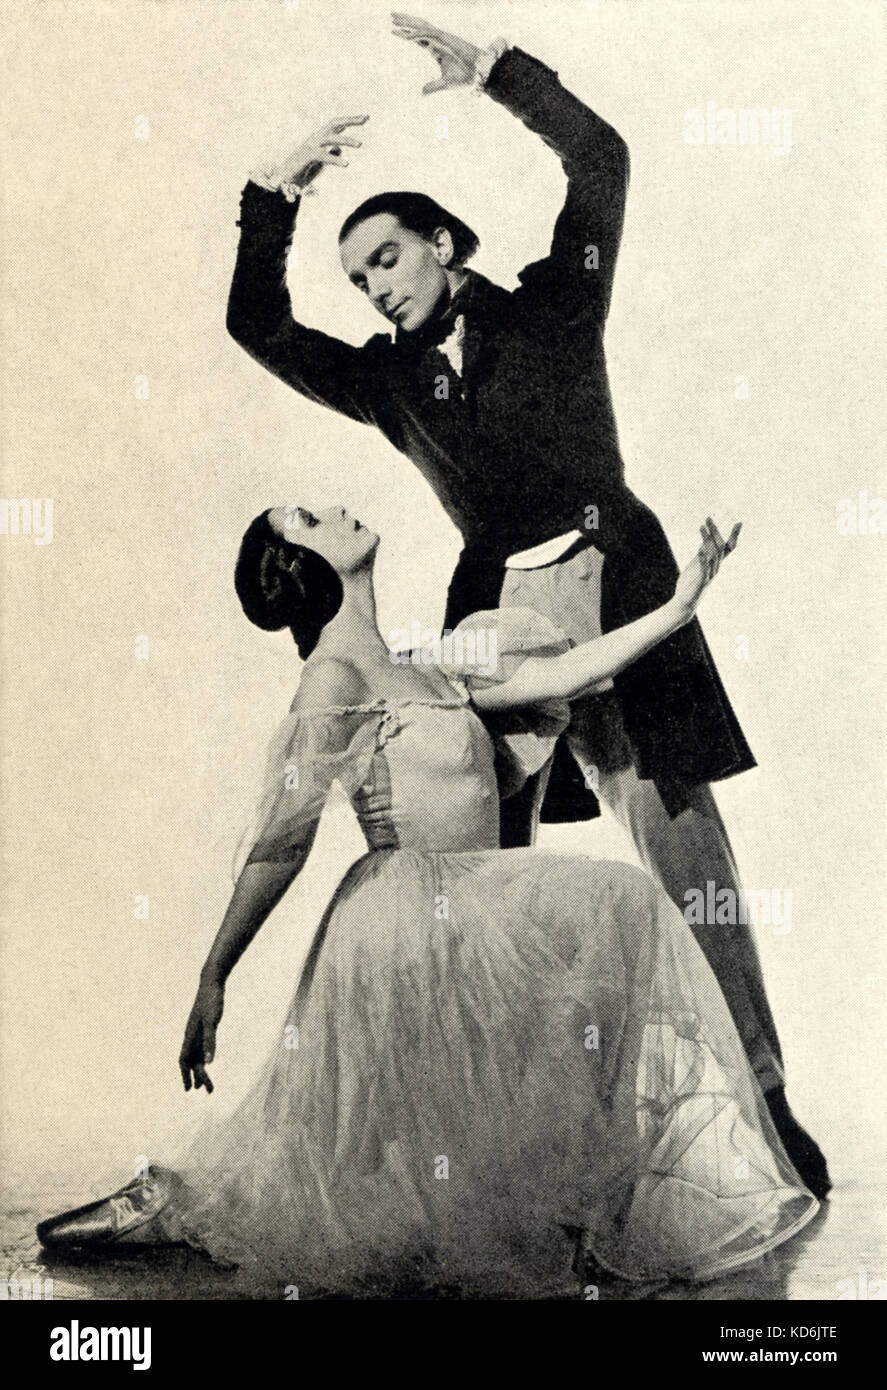 Berlioz's 'Symphonie Fantastique', scene with The Poet and His Beloved performed by Leonide Massine and Tamara Toumanova.  Choreography by Massine. French composer, 1803-1869. Stock Photo